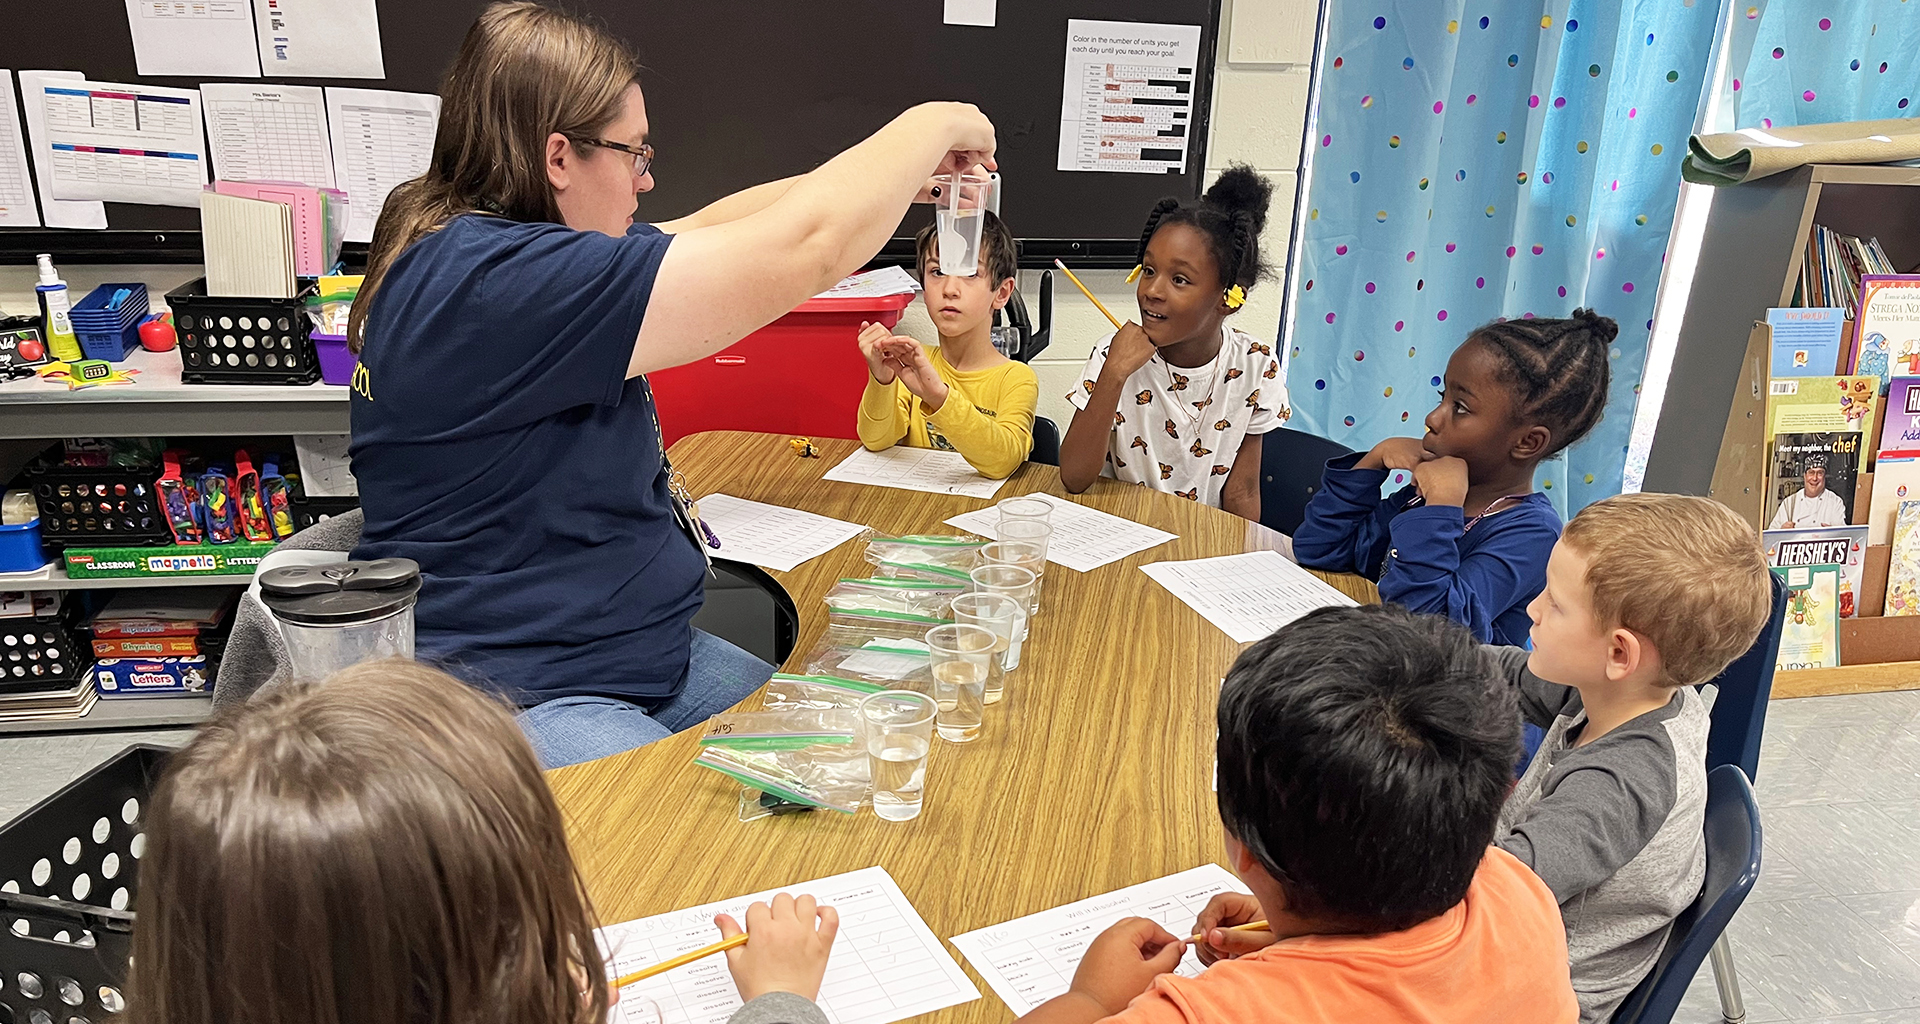 A teacher showing students a science experiment